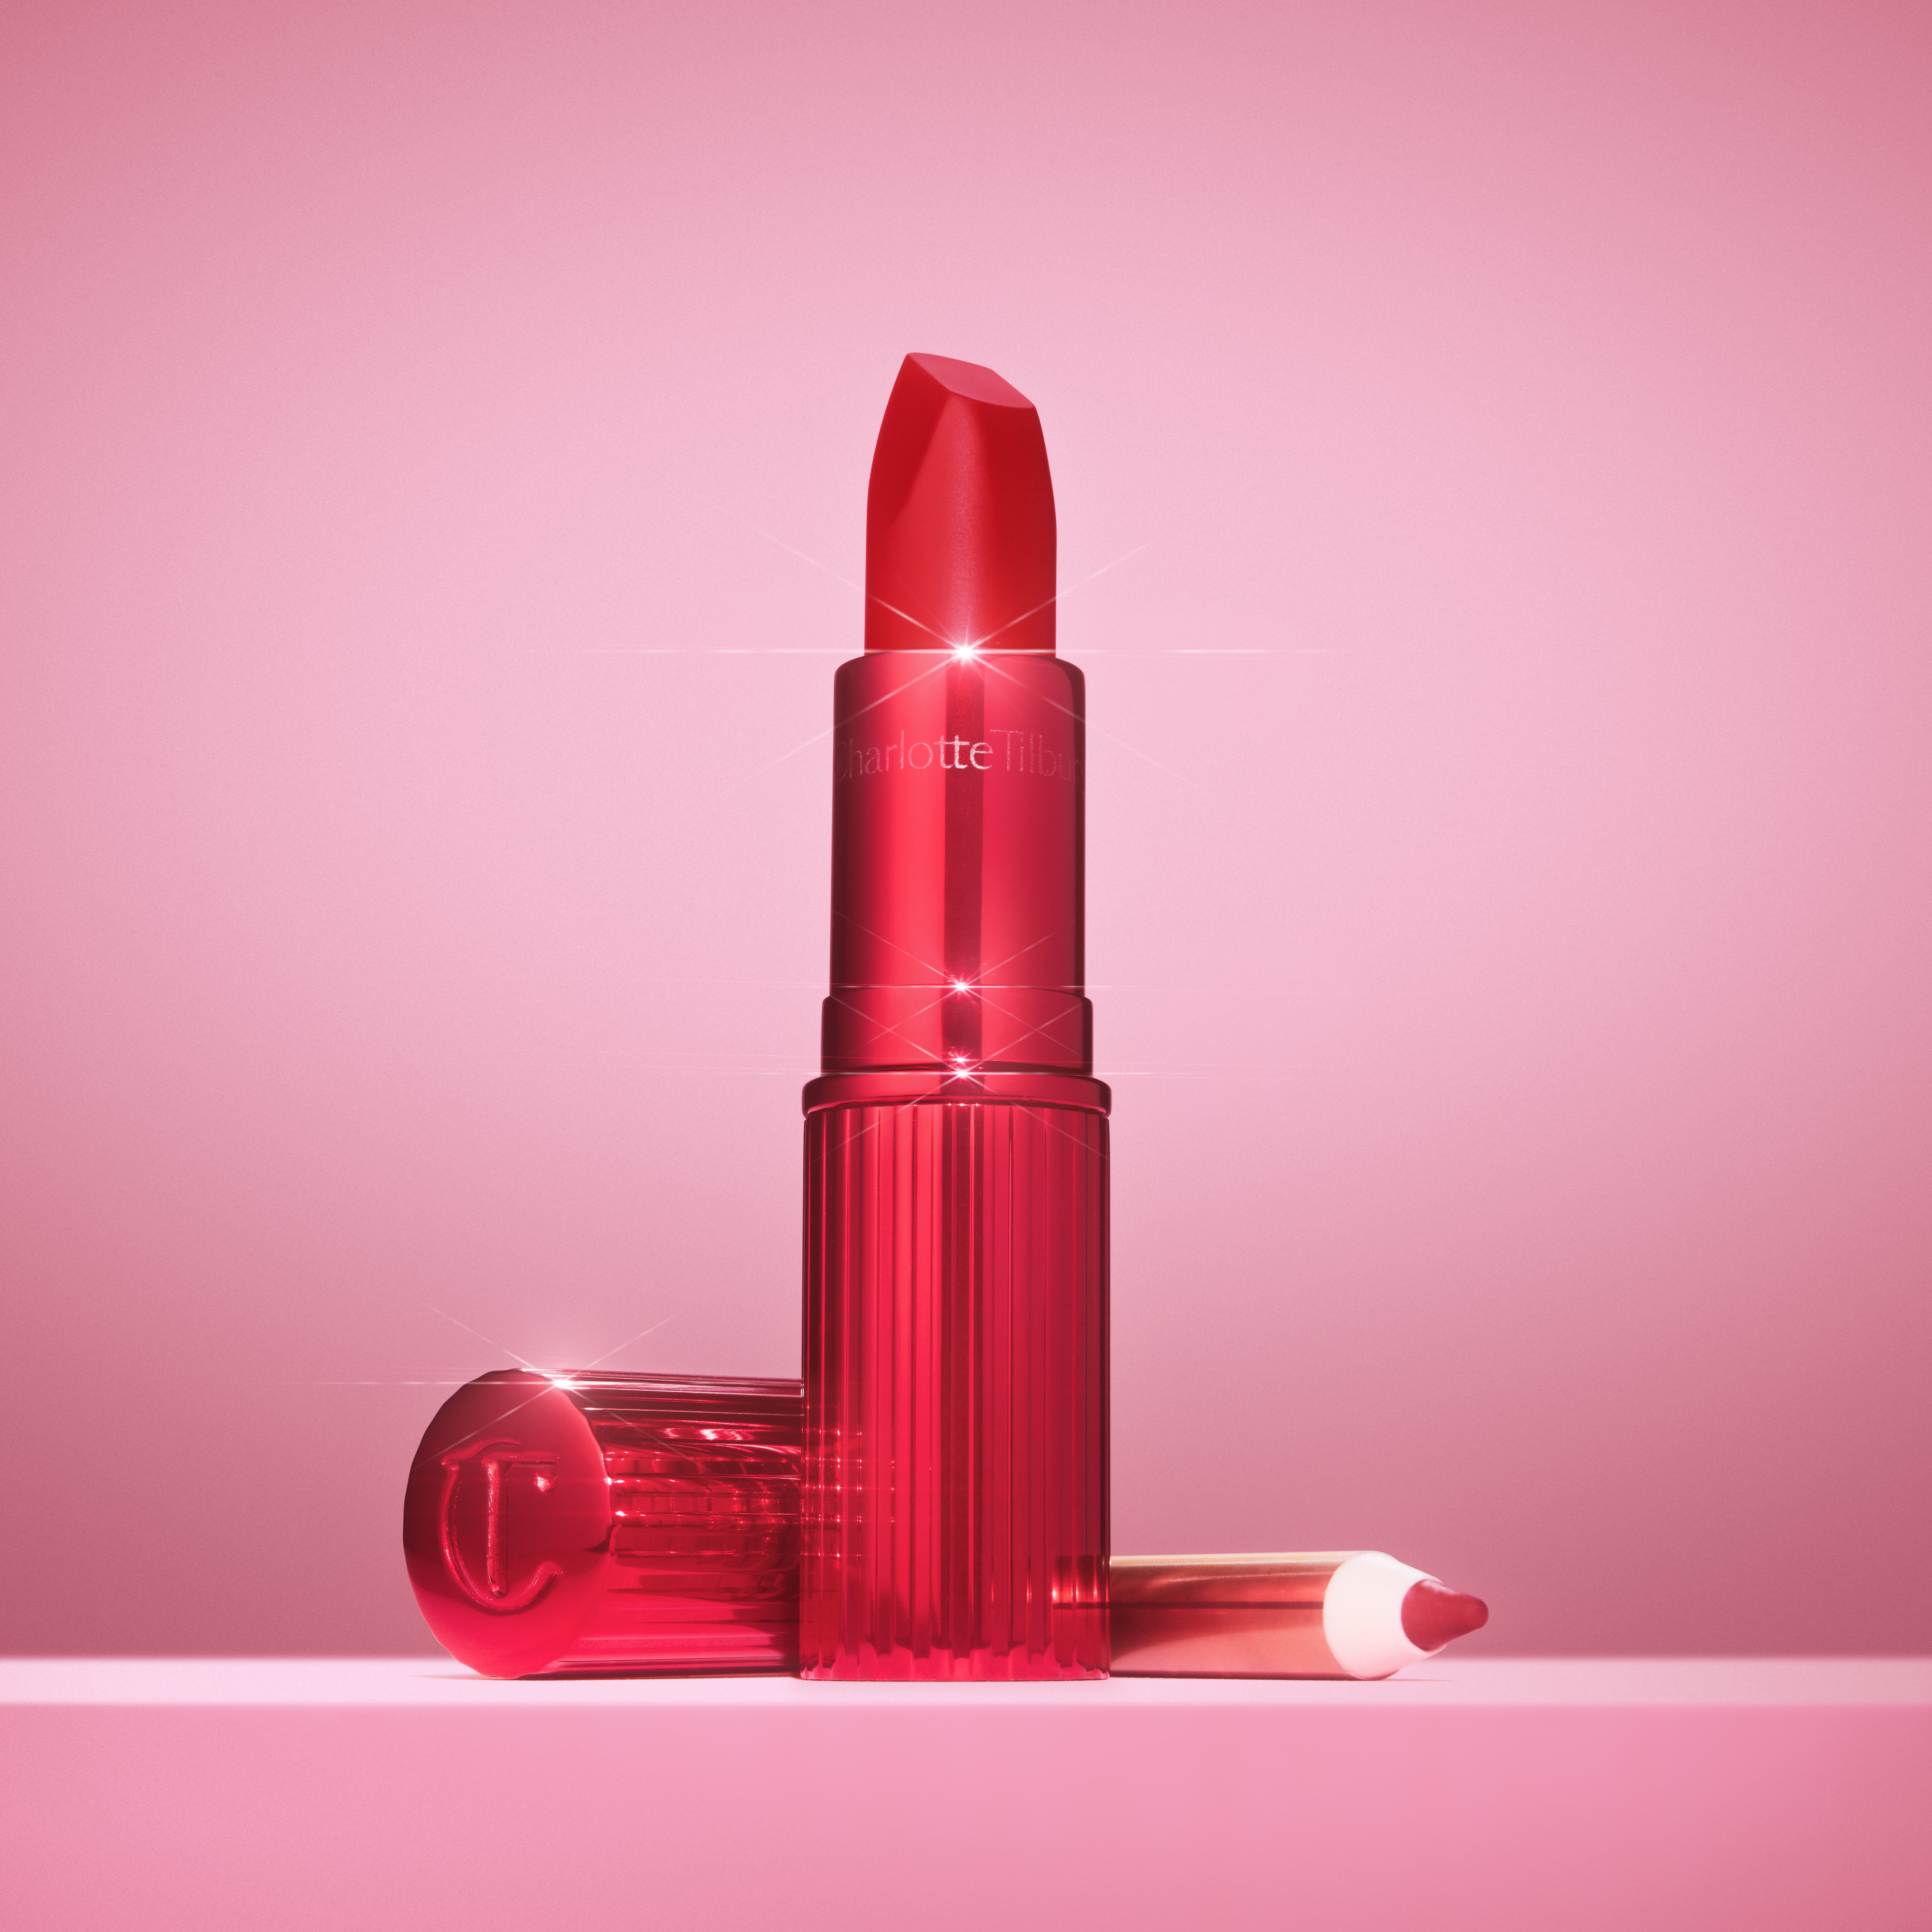 Hollywood Beauty Icon Red Lipstick still life